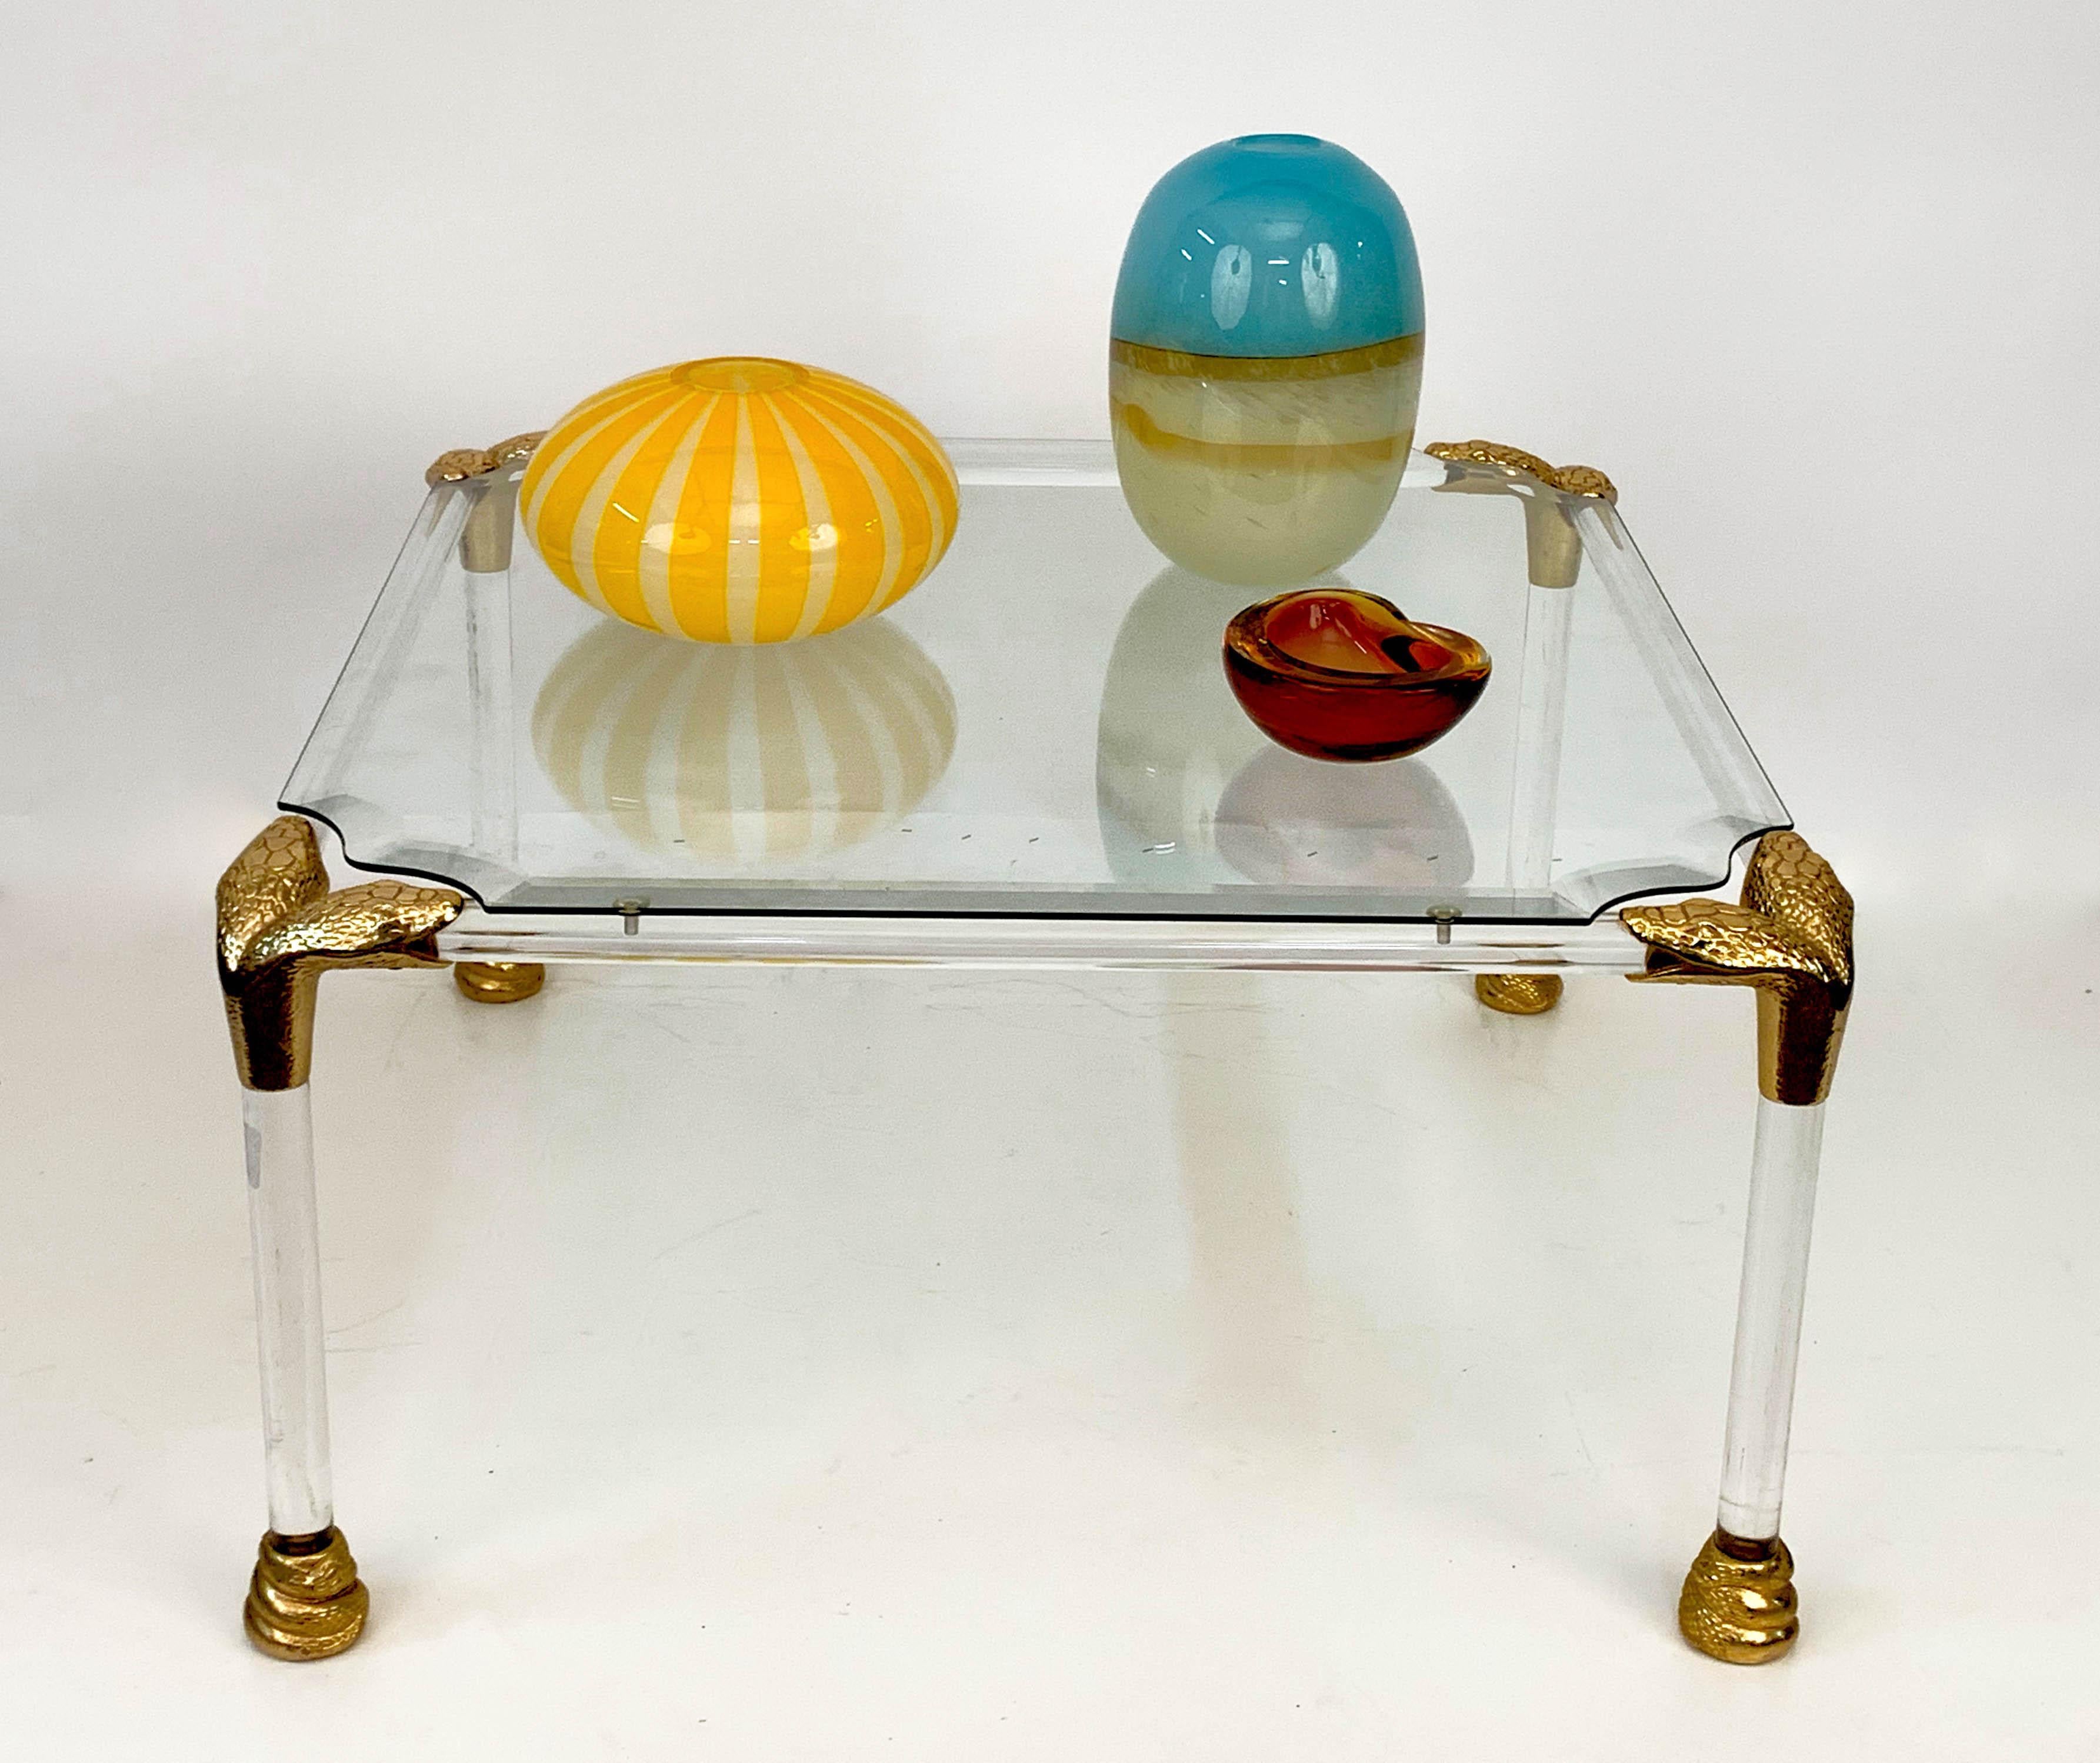 Midcentury Lucite and Brass Italian Coffee Table with Snake Head Details, 1970s For Sale 4